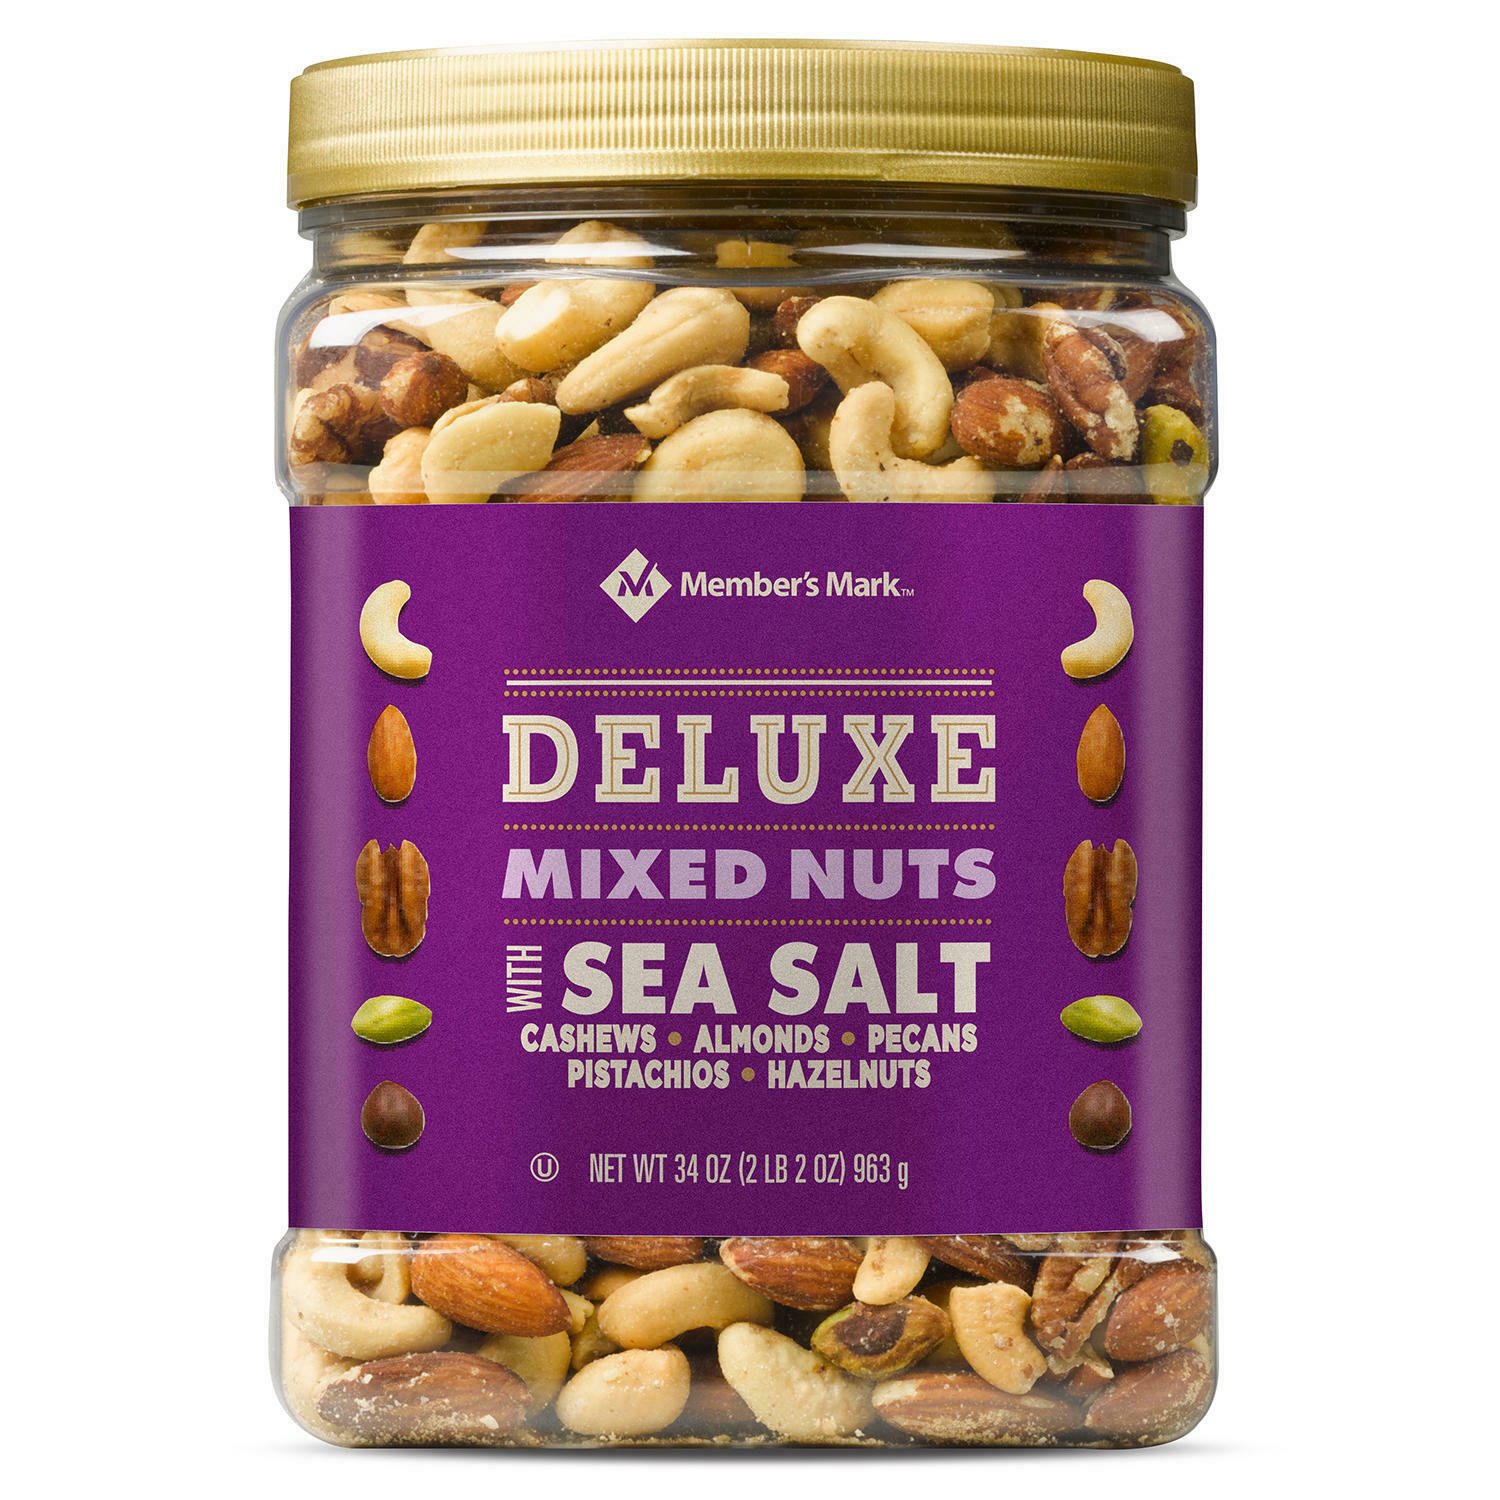 Member's Mark DELUXE Mixed Nuts With Sea Salt (34 oz.) NEW.